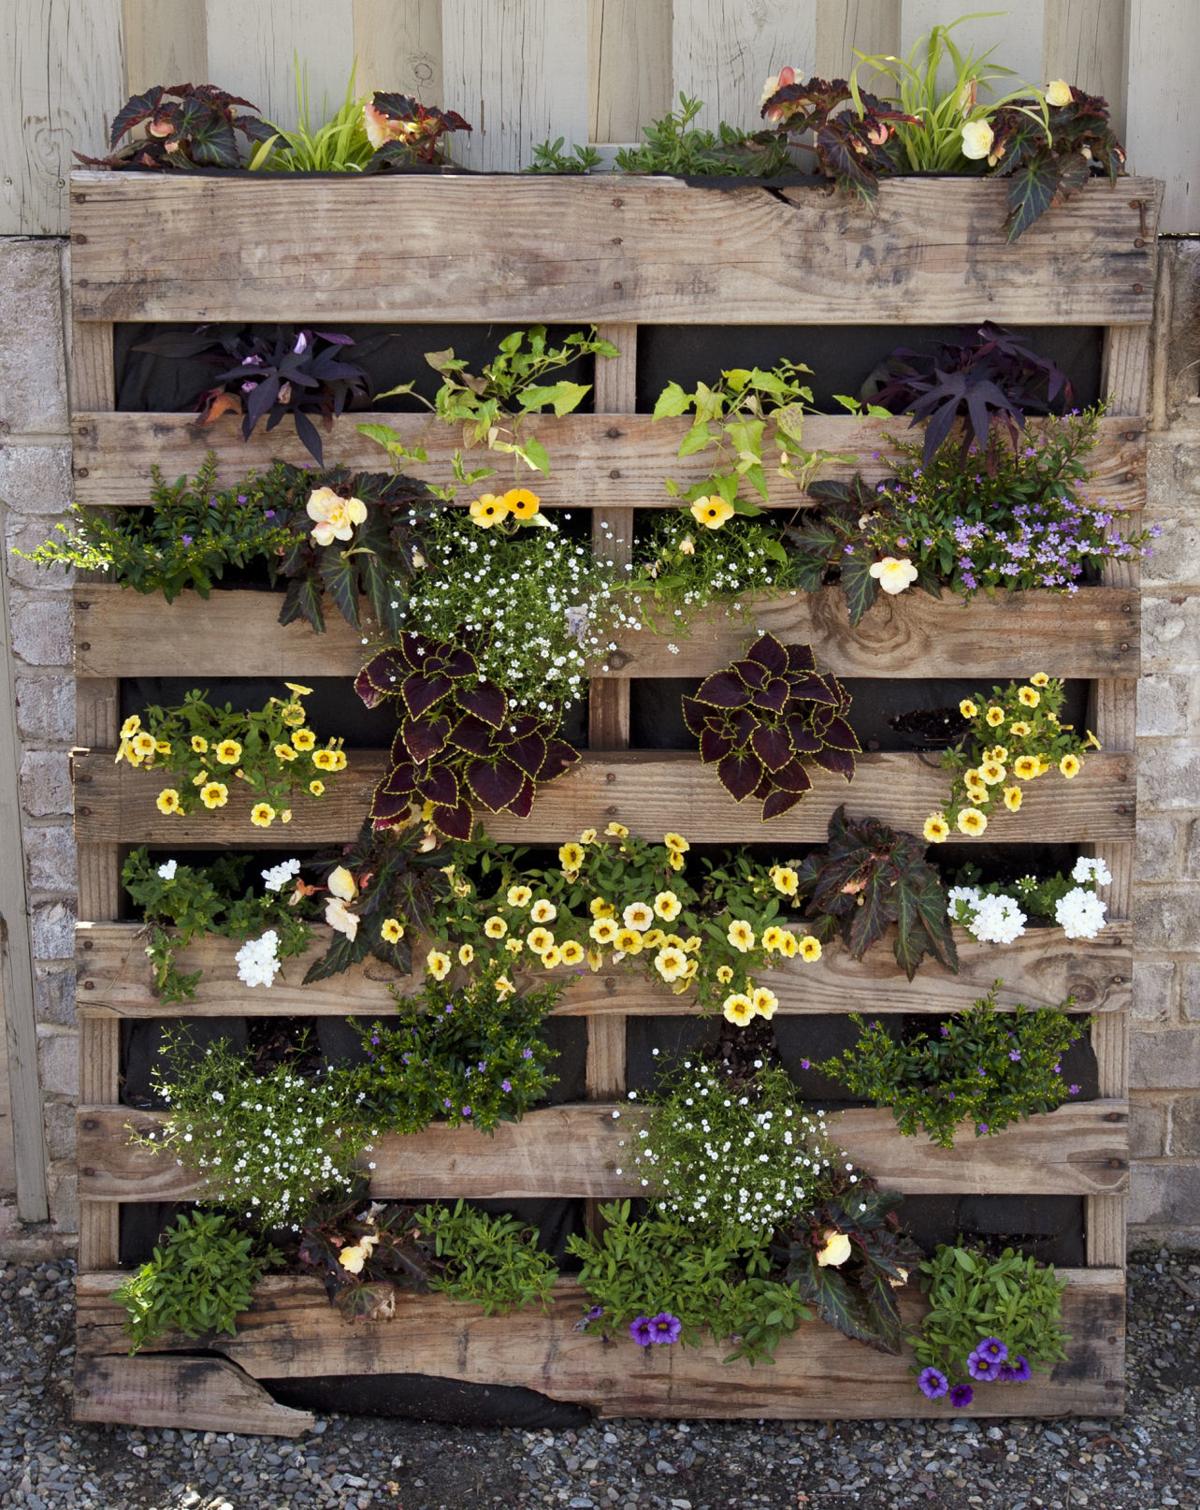 From Our Gardens Pallets Find New Life In The Garden Lifestyles